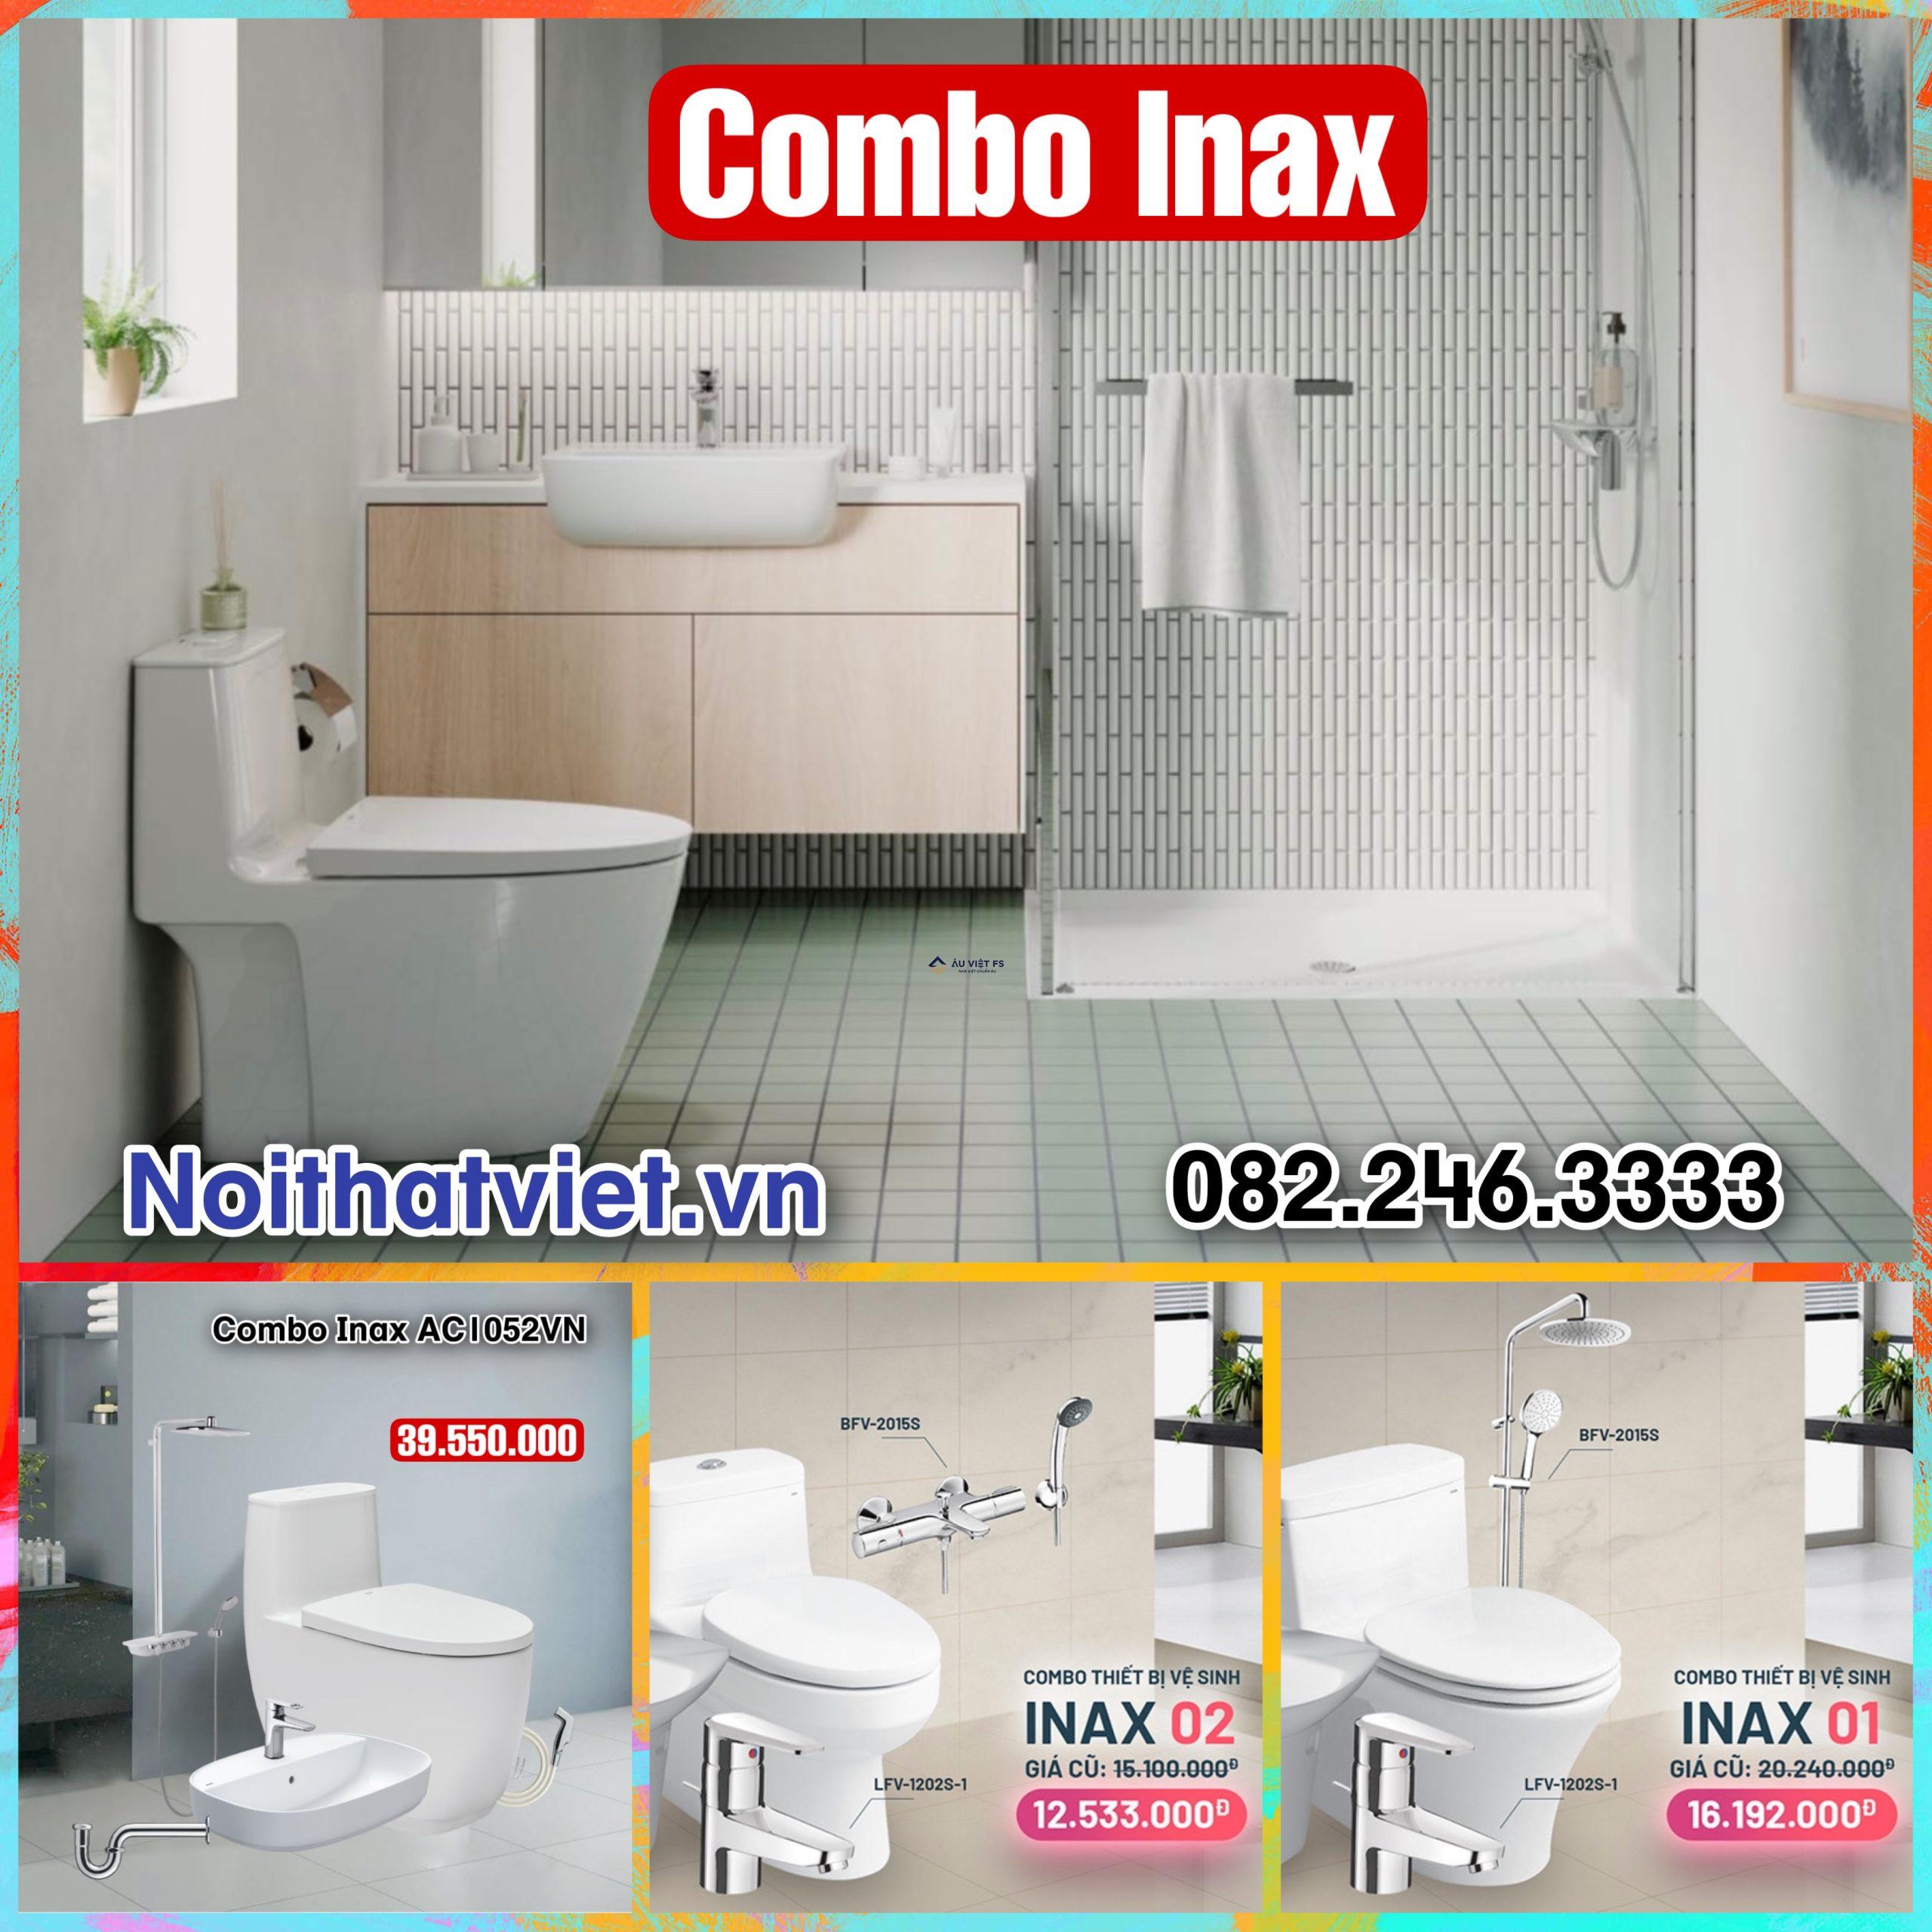 Combo thiết bị vệ sinh Inax 2024, Combo Inax, Combo Inax 2024, Combo thiết bị nhà tắm Inax, Combo thiết bị vệ sinh 2024, Thiết bị vệ sinh, Thiết bị vệ sinh Inax